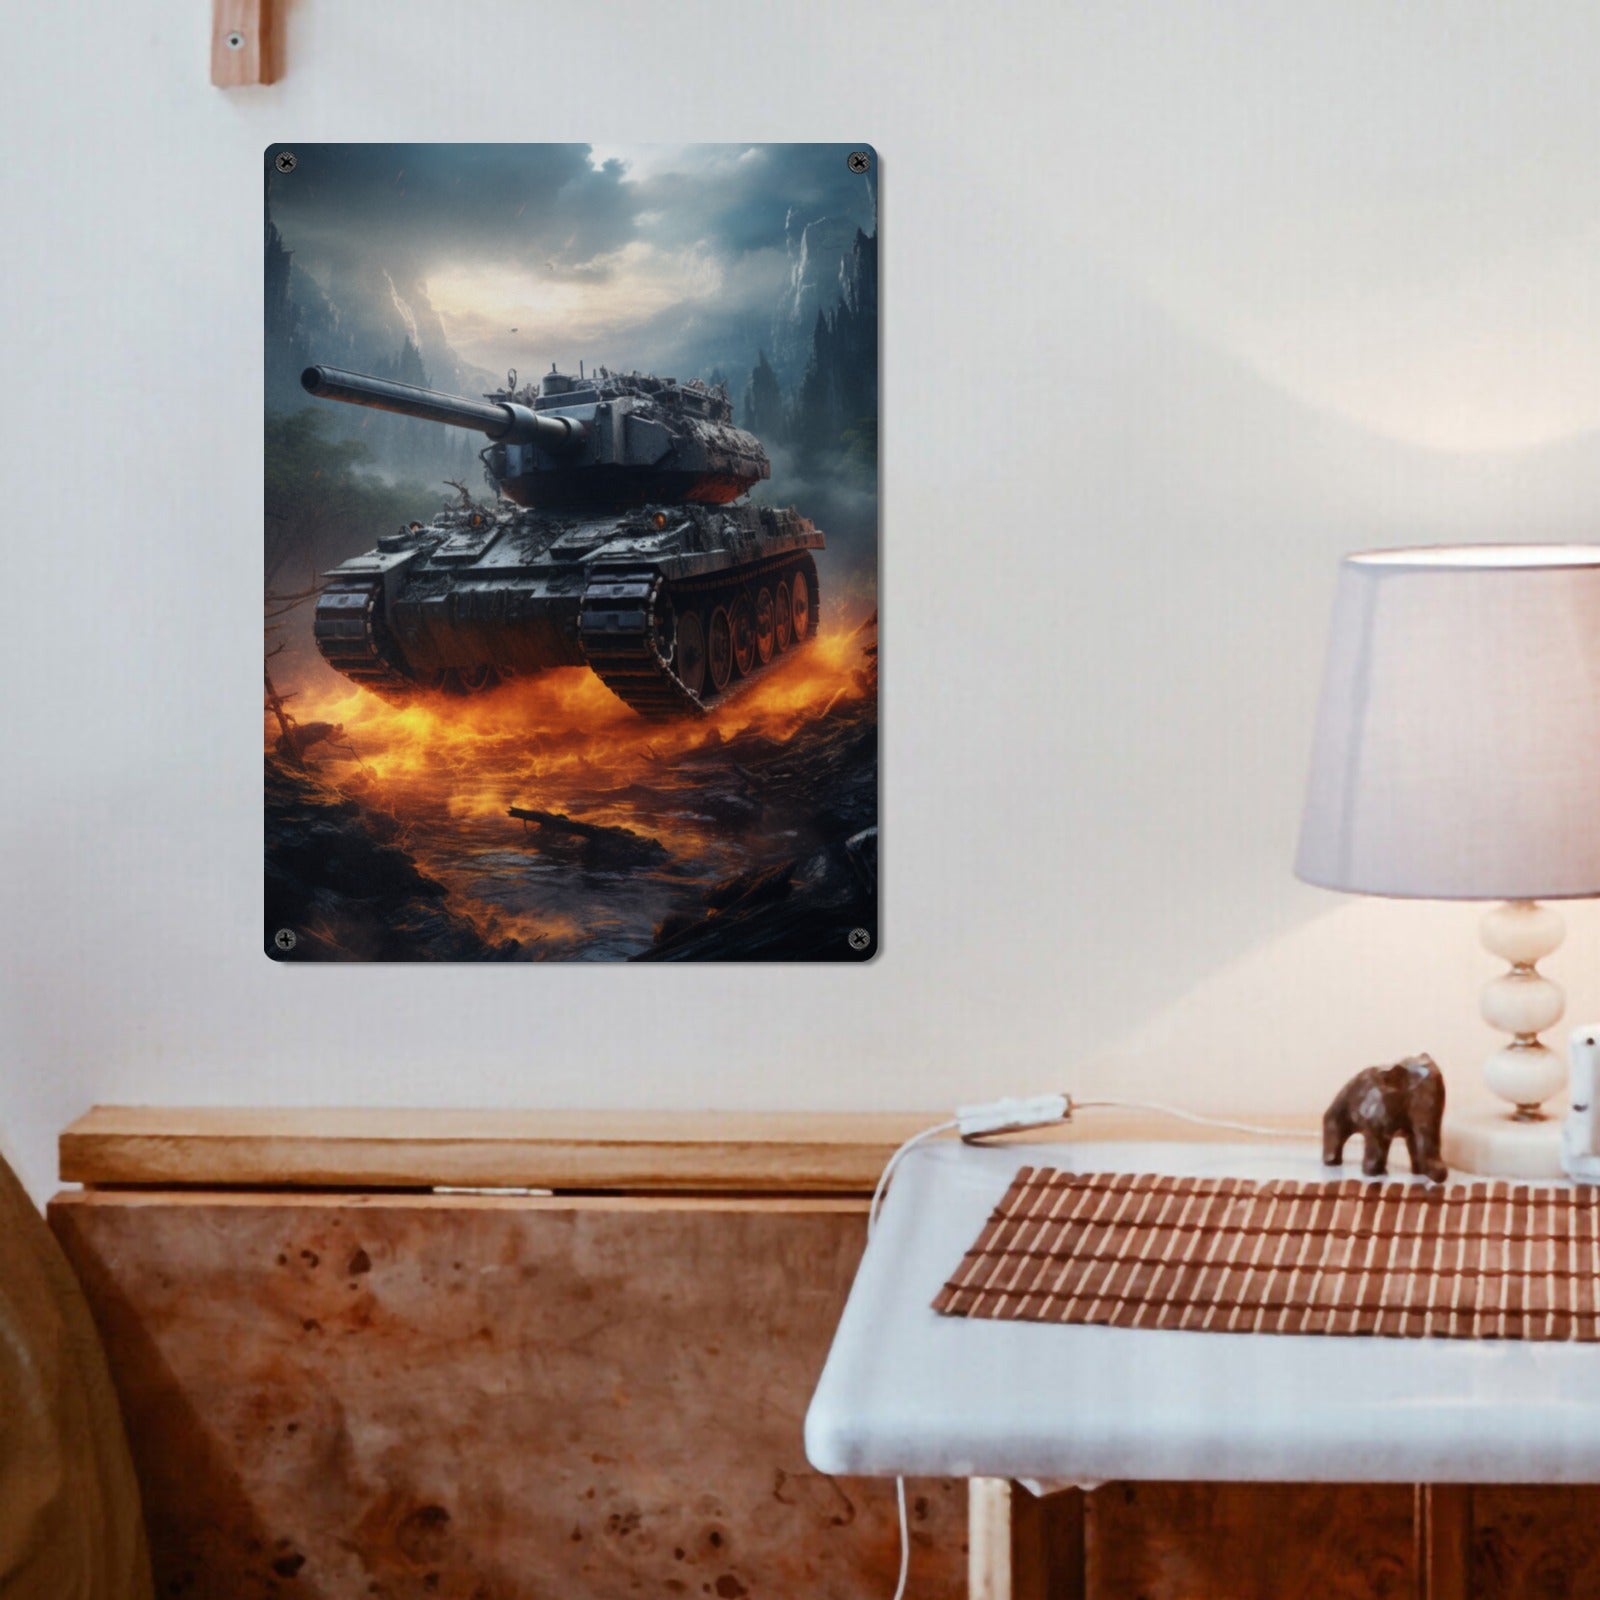 Kids Game Room Home Decor Wall Art Poster Military Tank Sign Indoor / Outdoor Metal Tin Sign 12"x16"